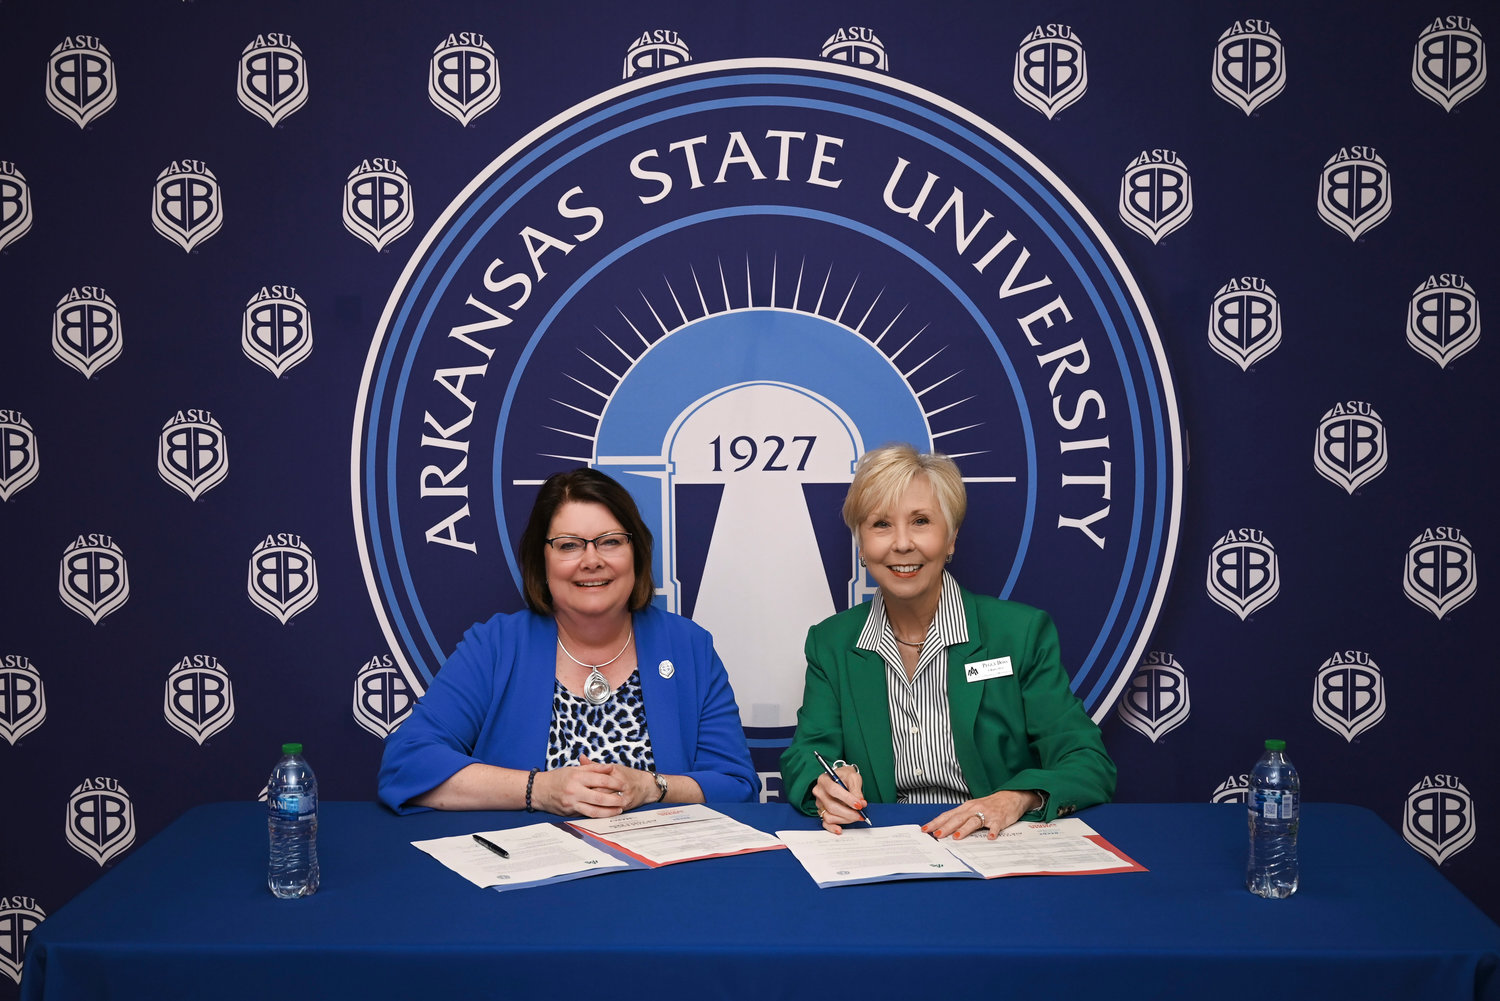 Pictured: (left to right) Dr. Jennifer Methvin and Dr. Peggy Doss